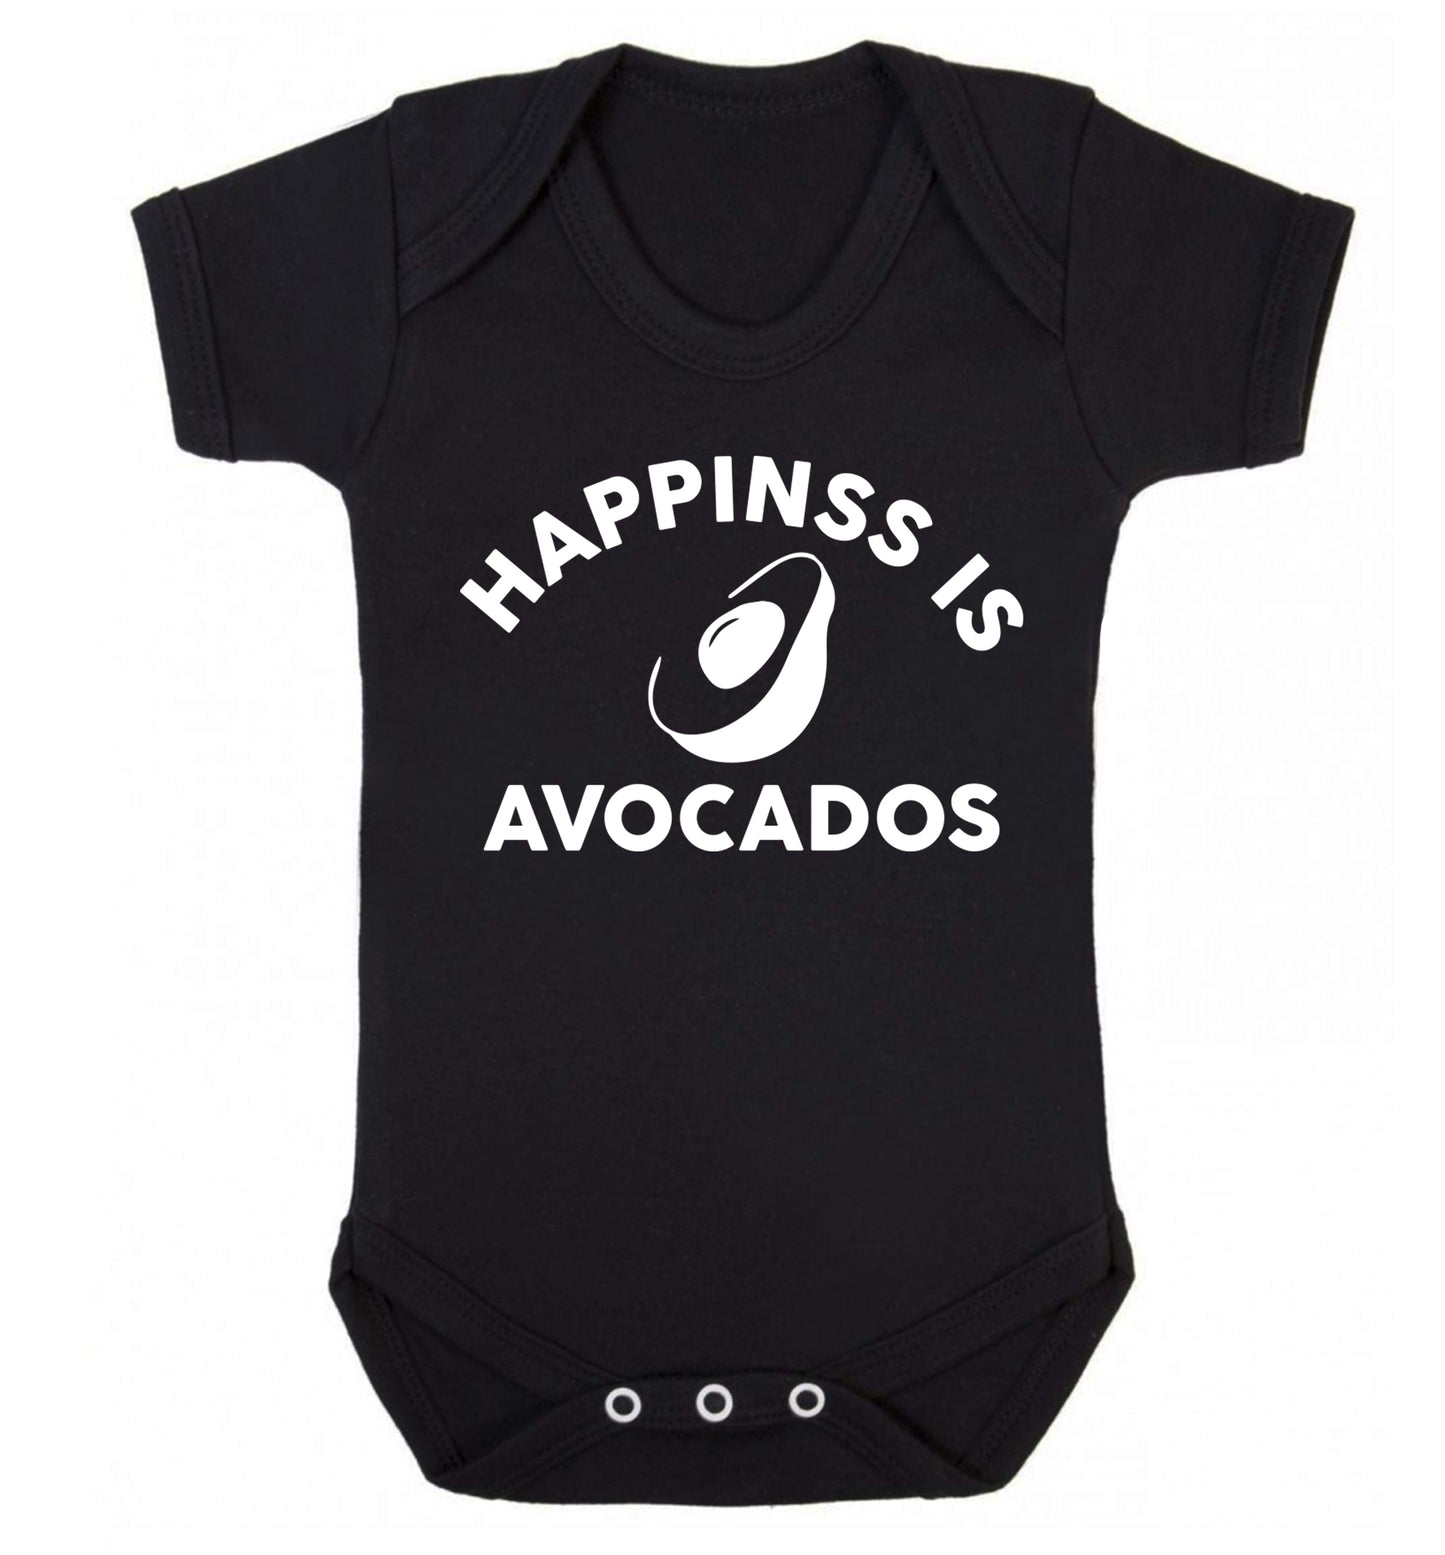 Happiness is avocados Baby Vest black 18-24 months